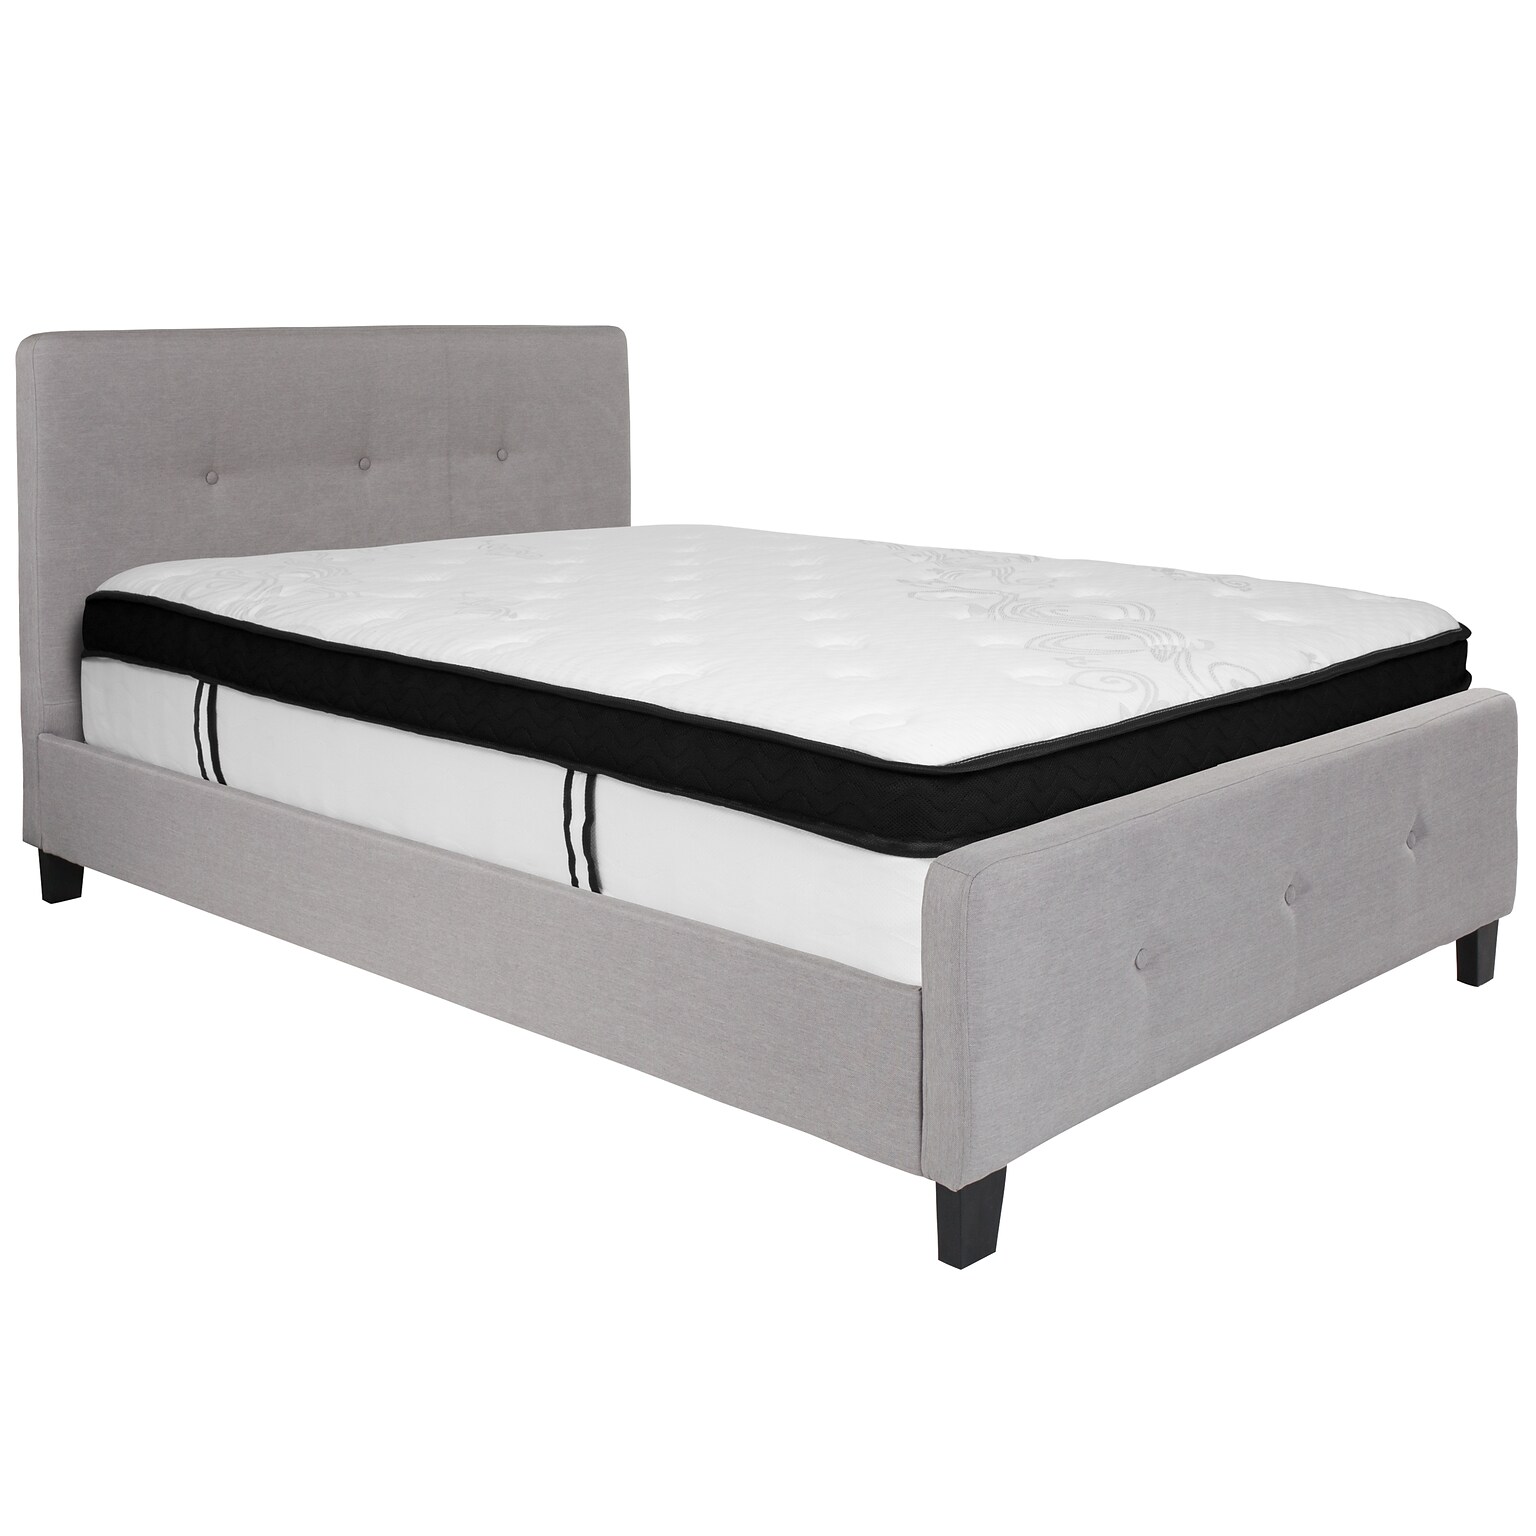 Flash Furniture Tribeca Tufted Upholstered Platform Bed in Light Gray Fabric with Memory Foam Mattress, Full (HGBMF26)